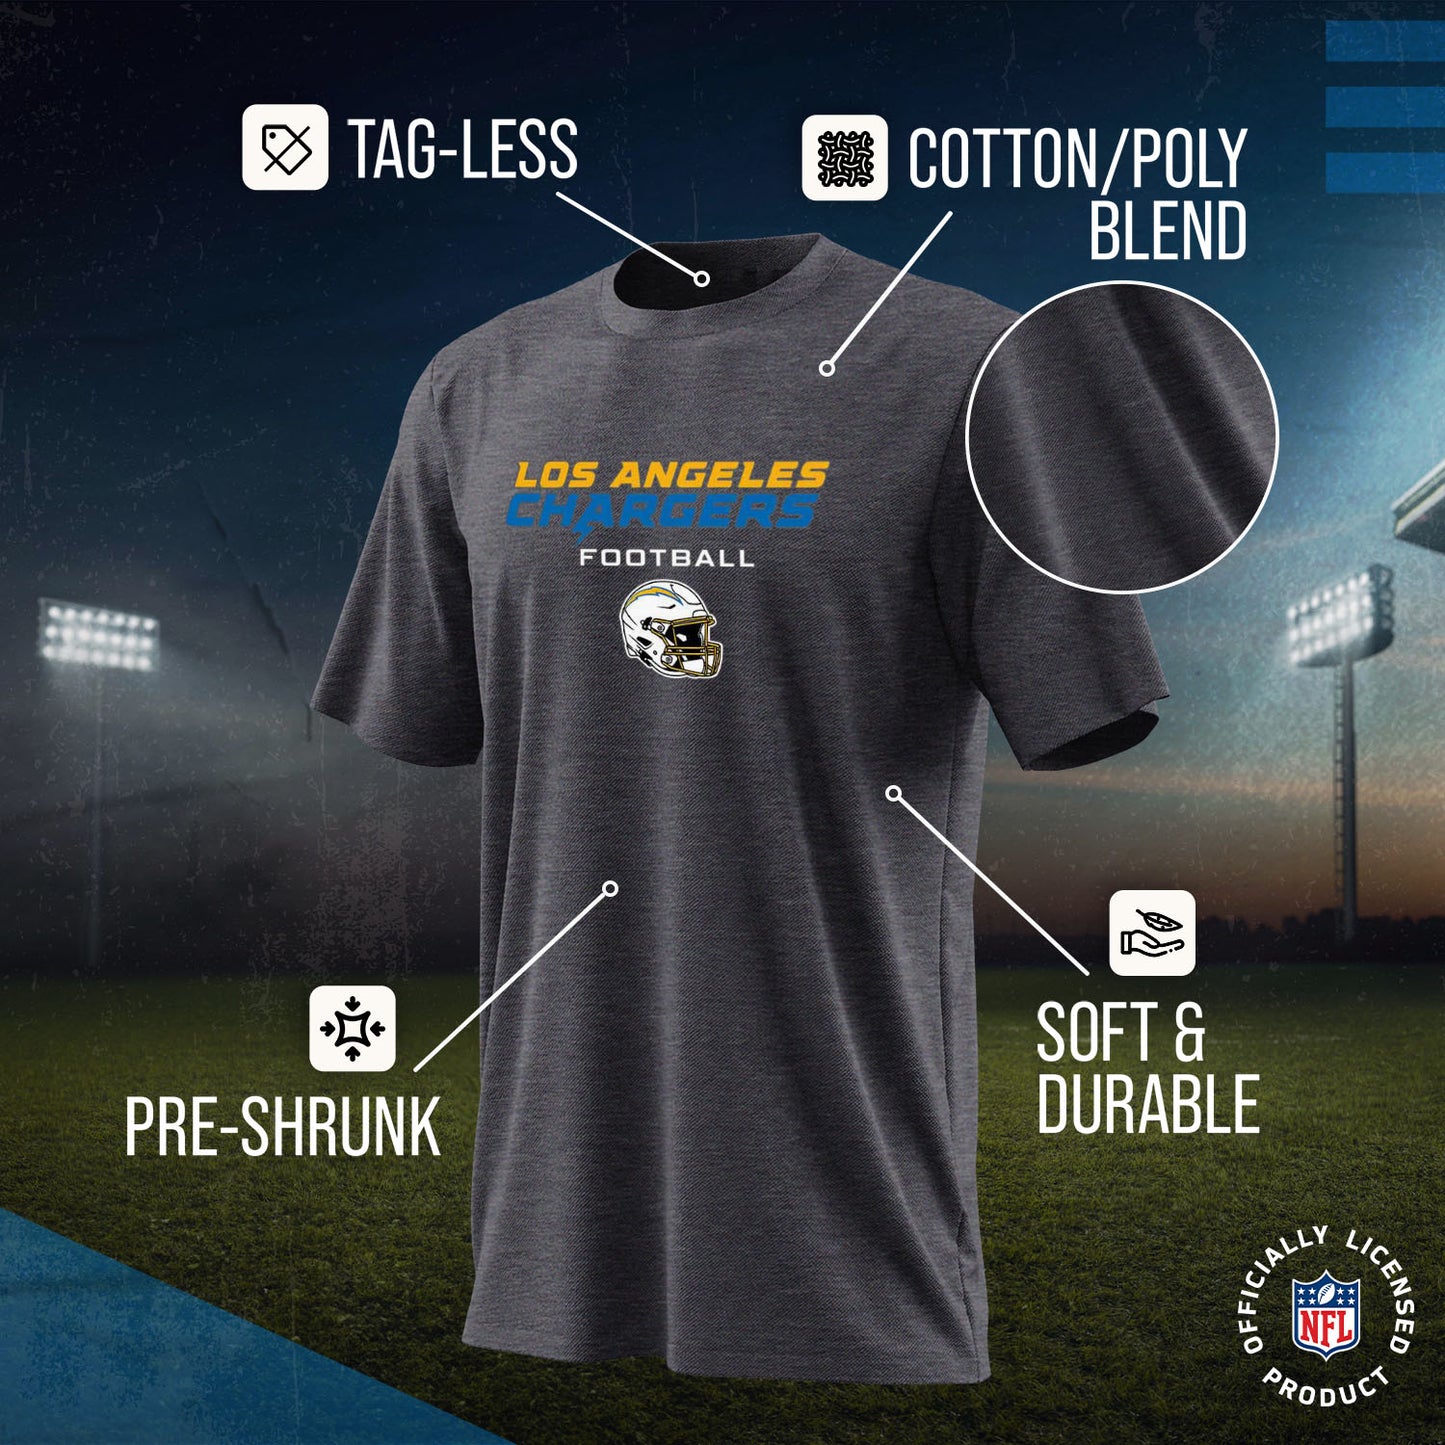 Los Angeles Chargers NFL Youth Football Helmet Tagless T-Shirt - Charcoal